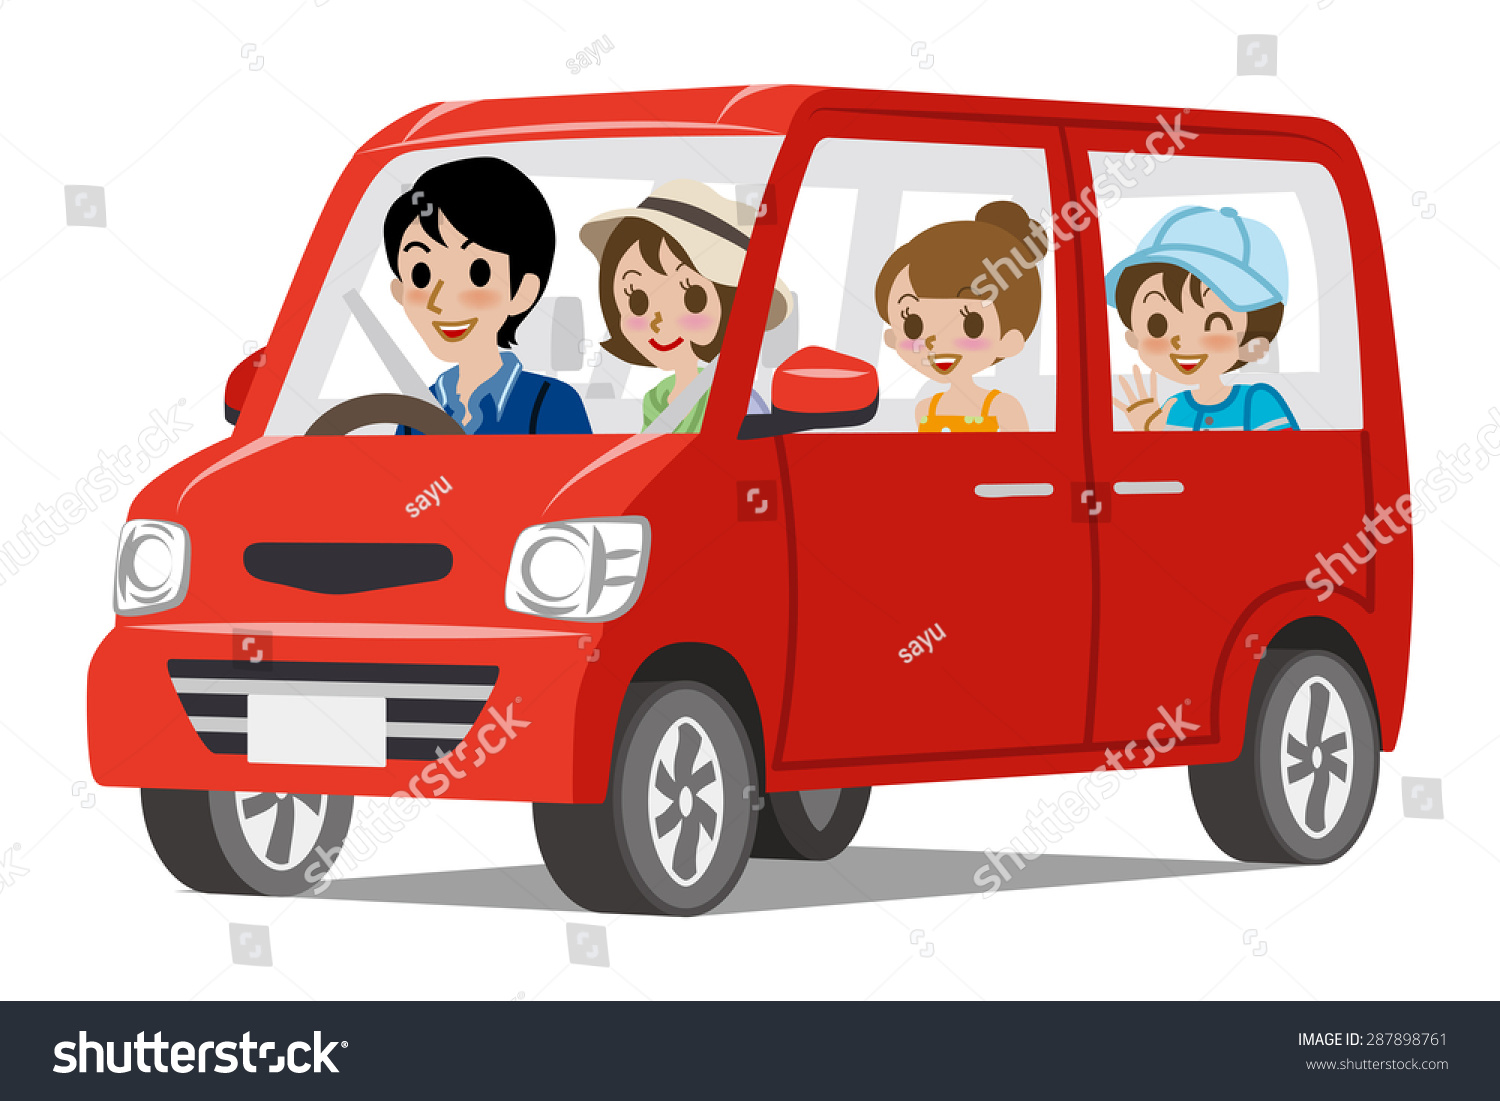 free clipart family in car - photo #33